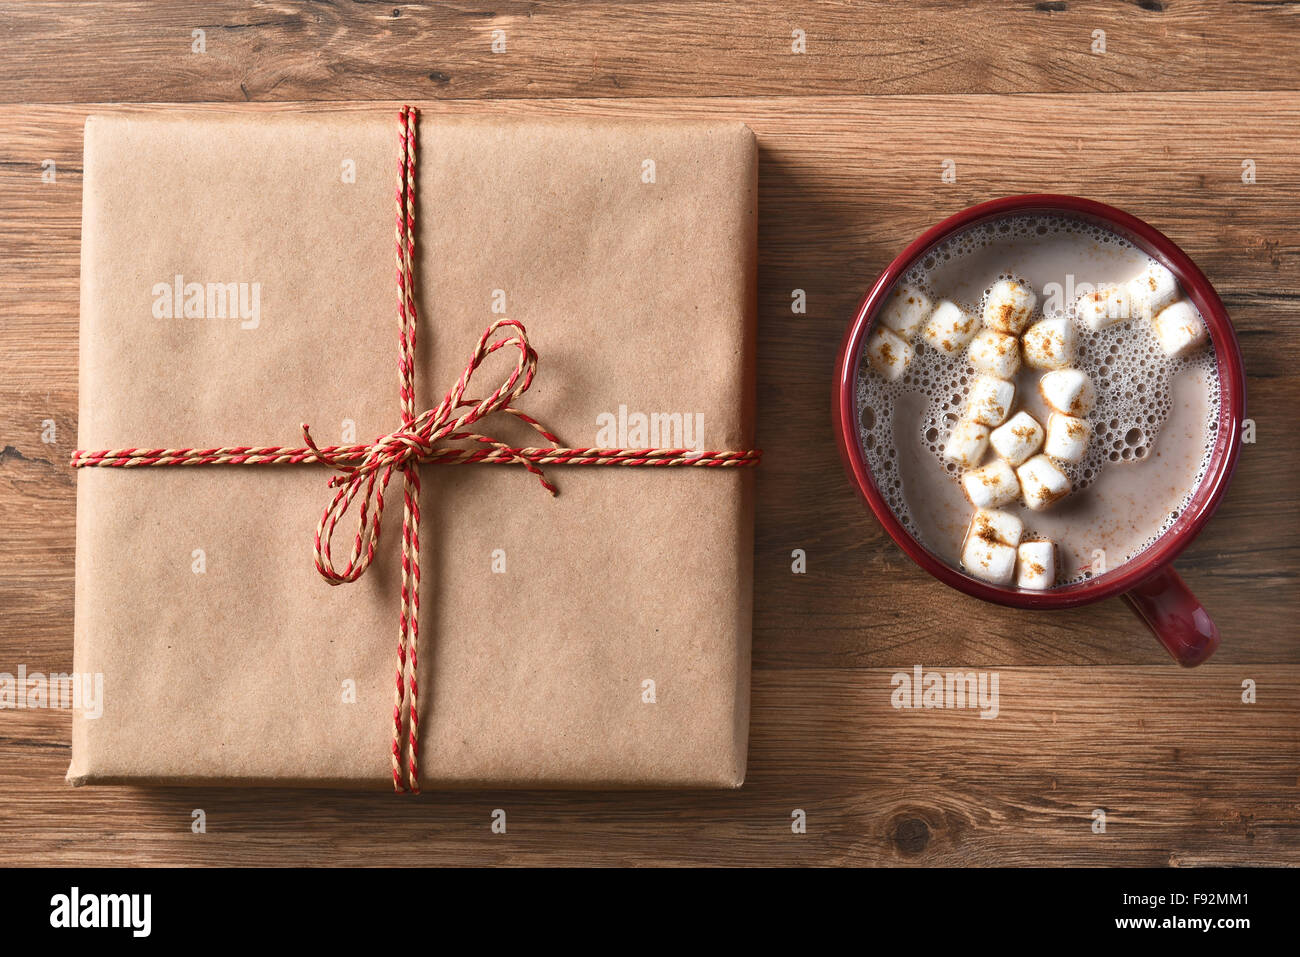 High angle view of a plain brown paper wrapped Christmas Present next to a large mug of hot cocoa with marshmallows. Stock Photo